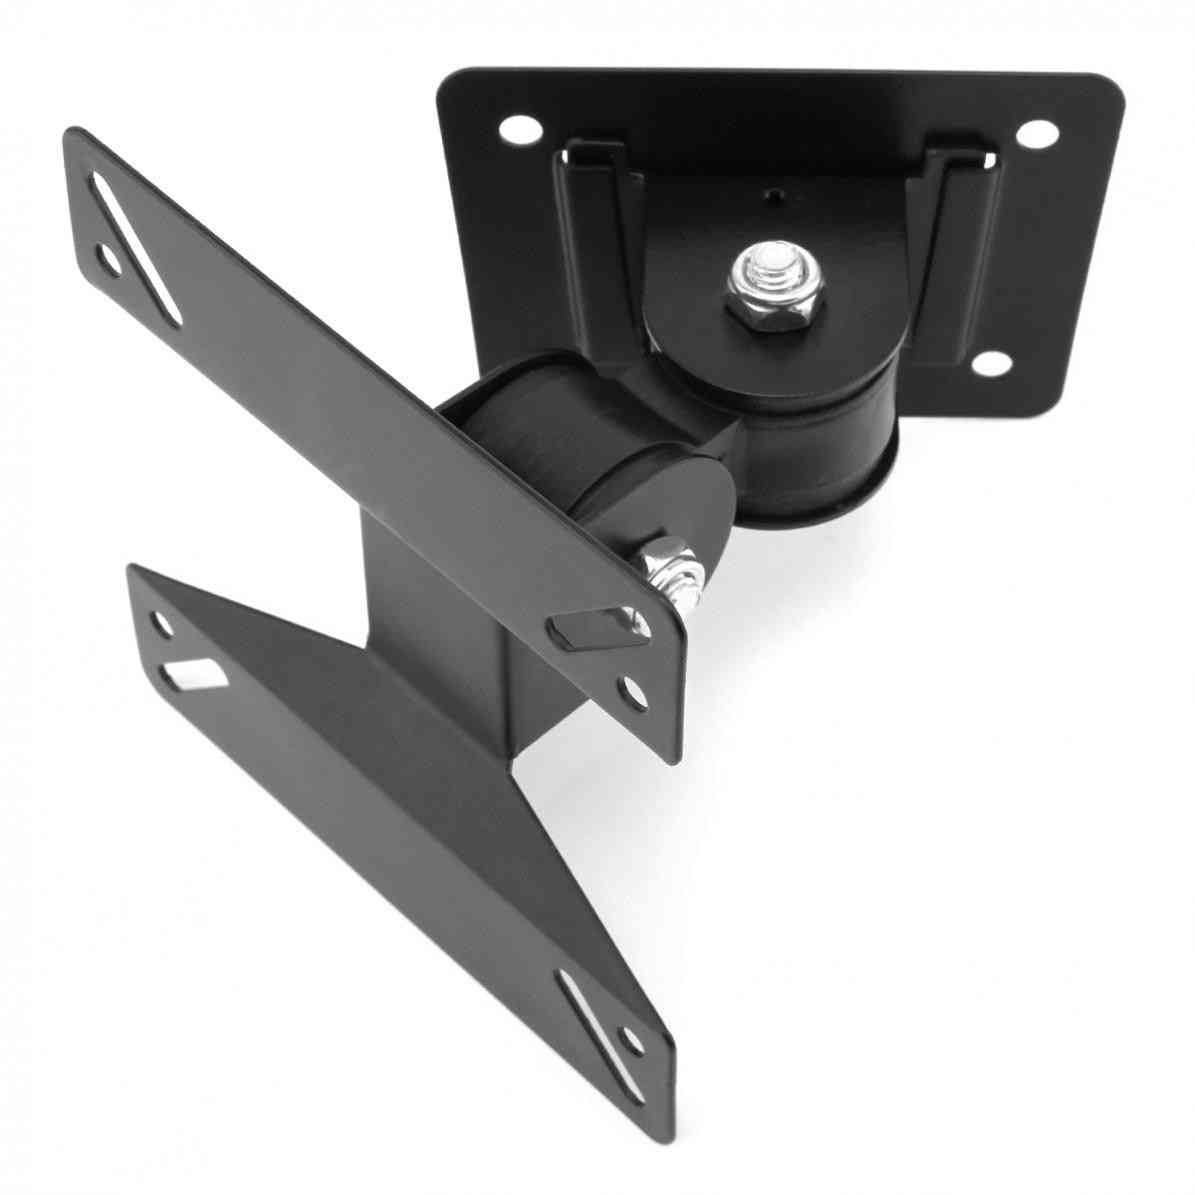 Tv Wall Mount Bracket - Support 180 Degrees Rotation For 14-27 Inch Lcd / Led Flat Panel Tv Stand